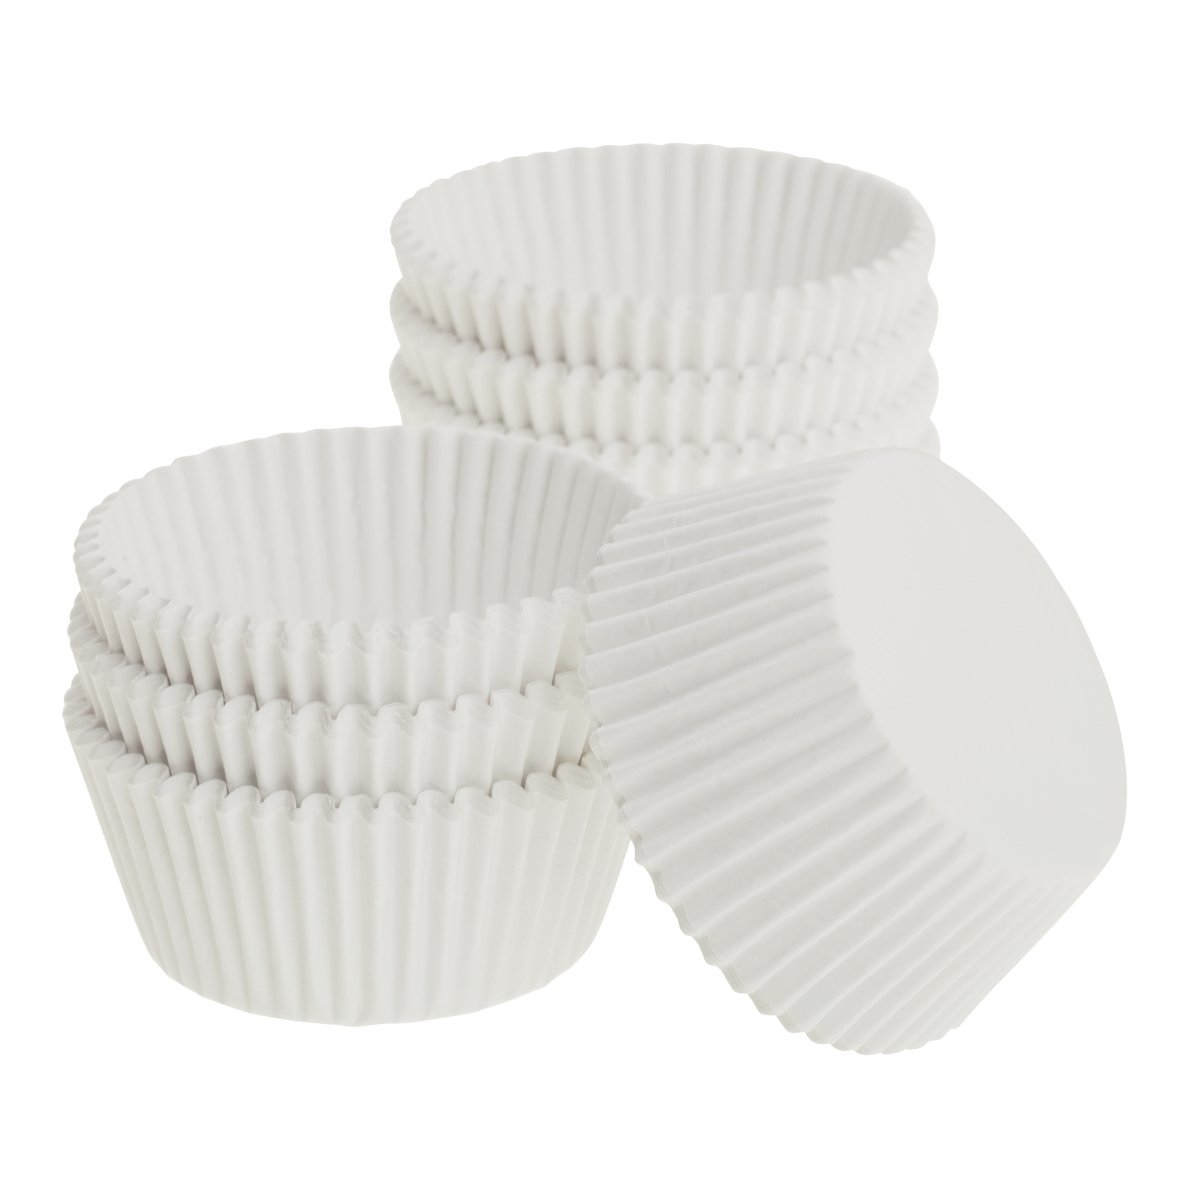 Cupcake Creations Light Blue Mini Baking Cups (60 Pack)